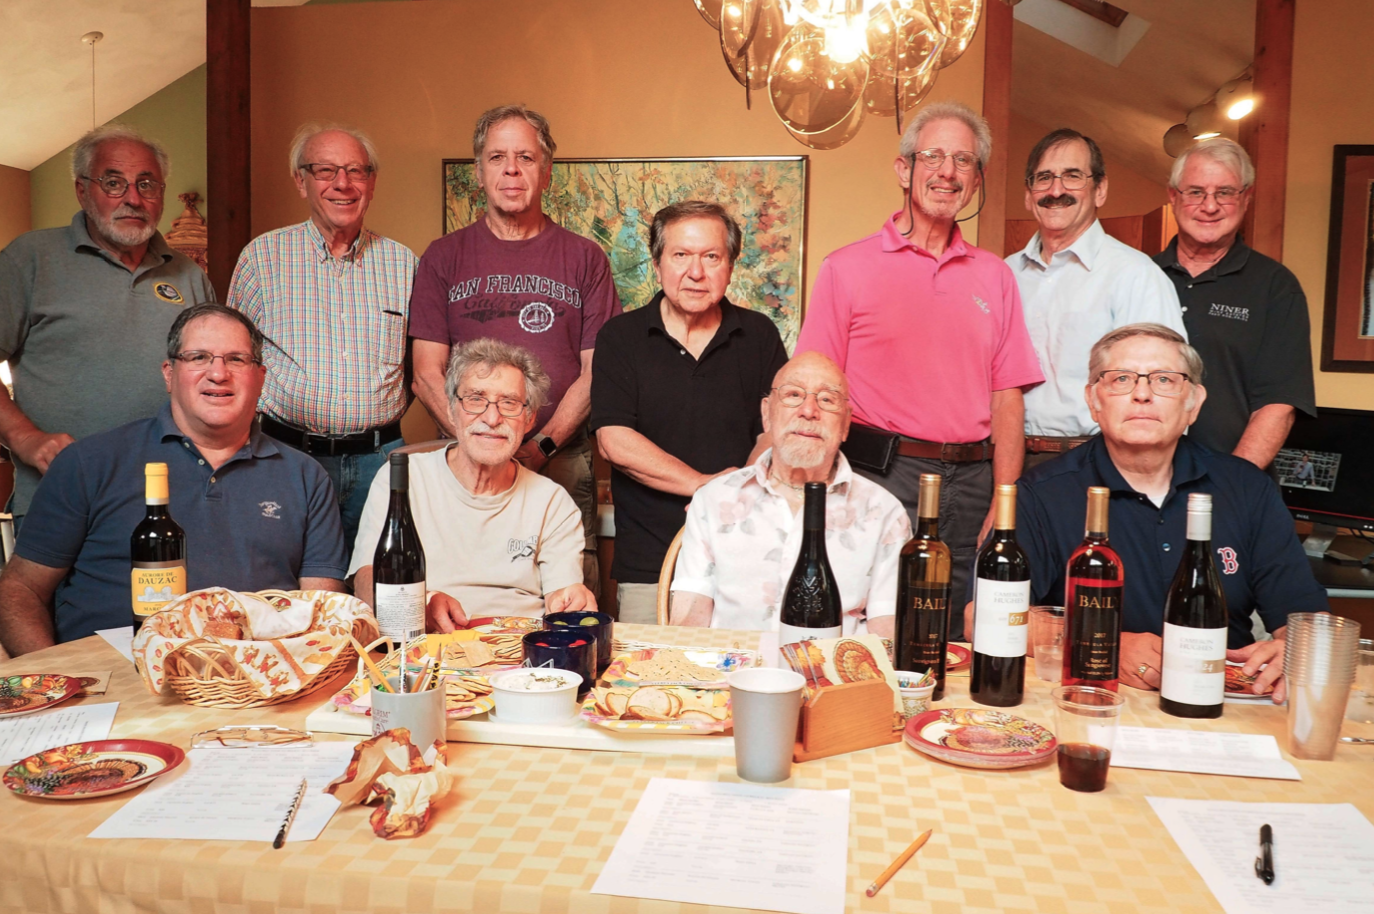 Older men seated and standing around a table loaded with various wine bottles